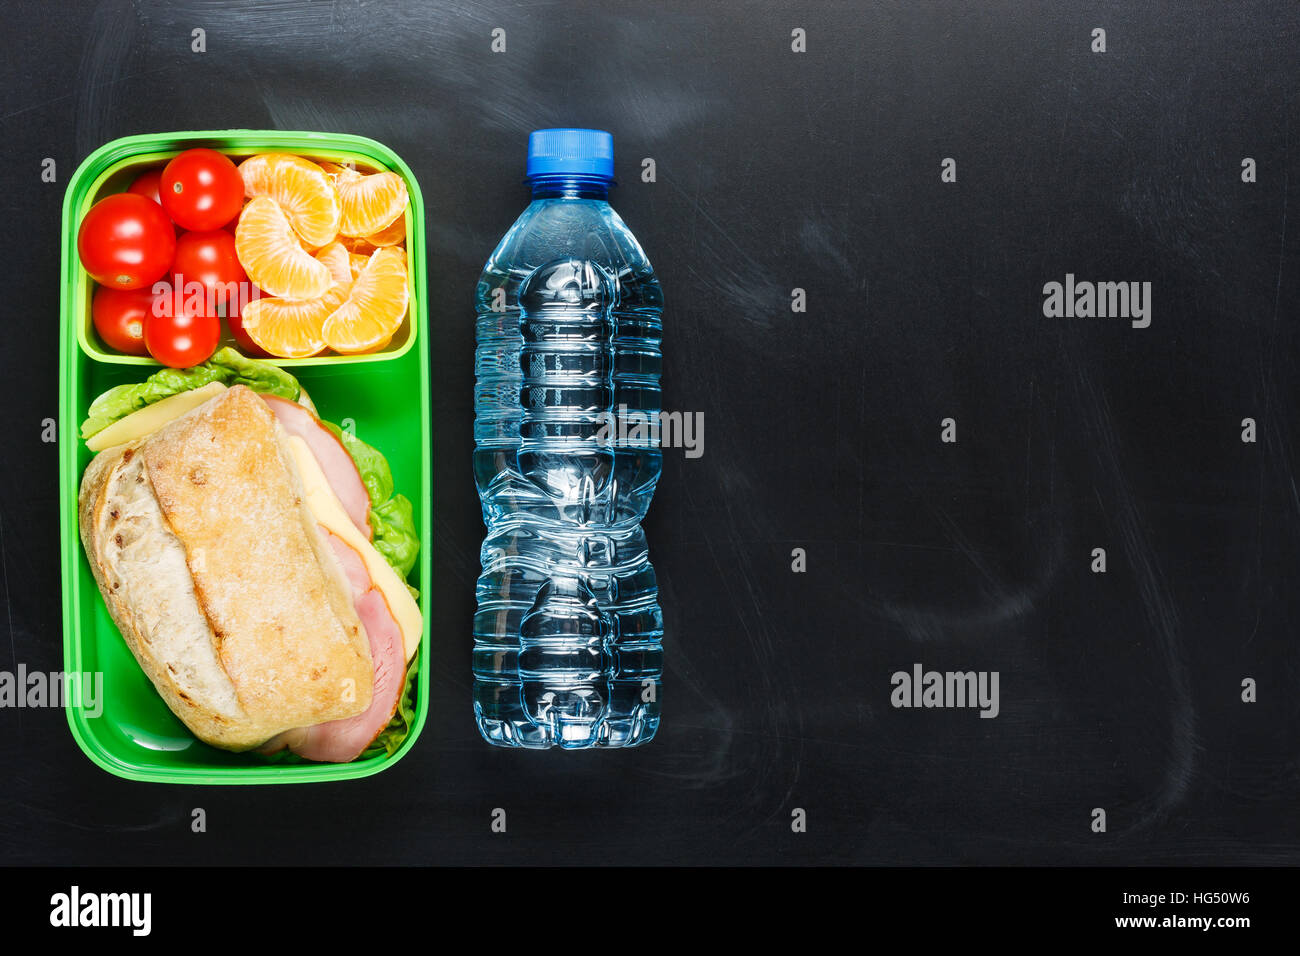 Sandwich, small tomatoes, tangerine in plastic lunch box and bottle of water on black chalkboard. Stock Photo